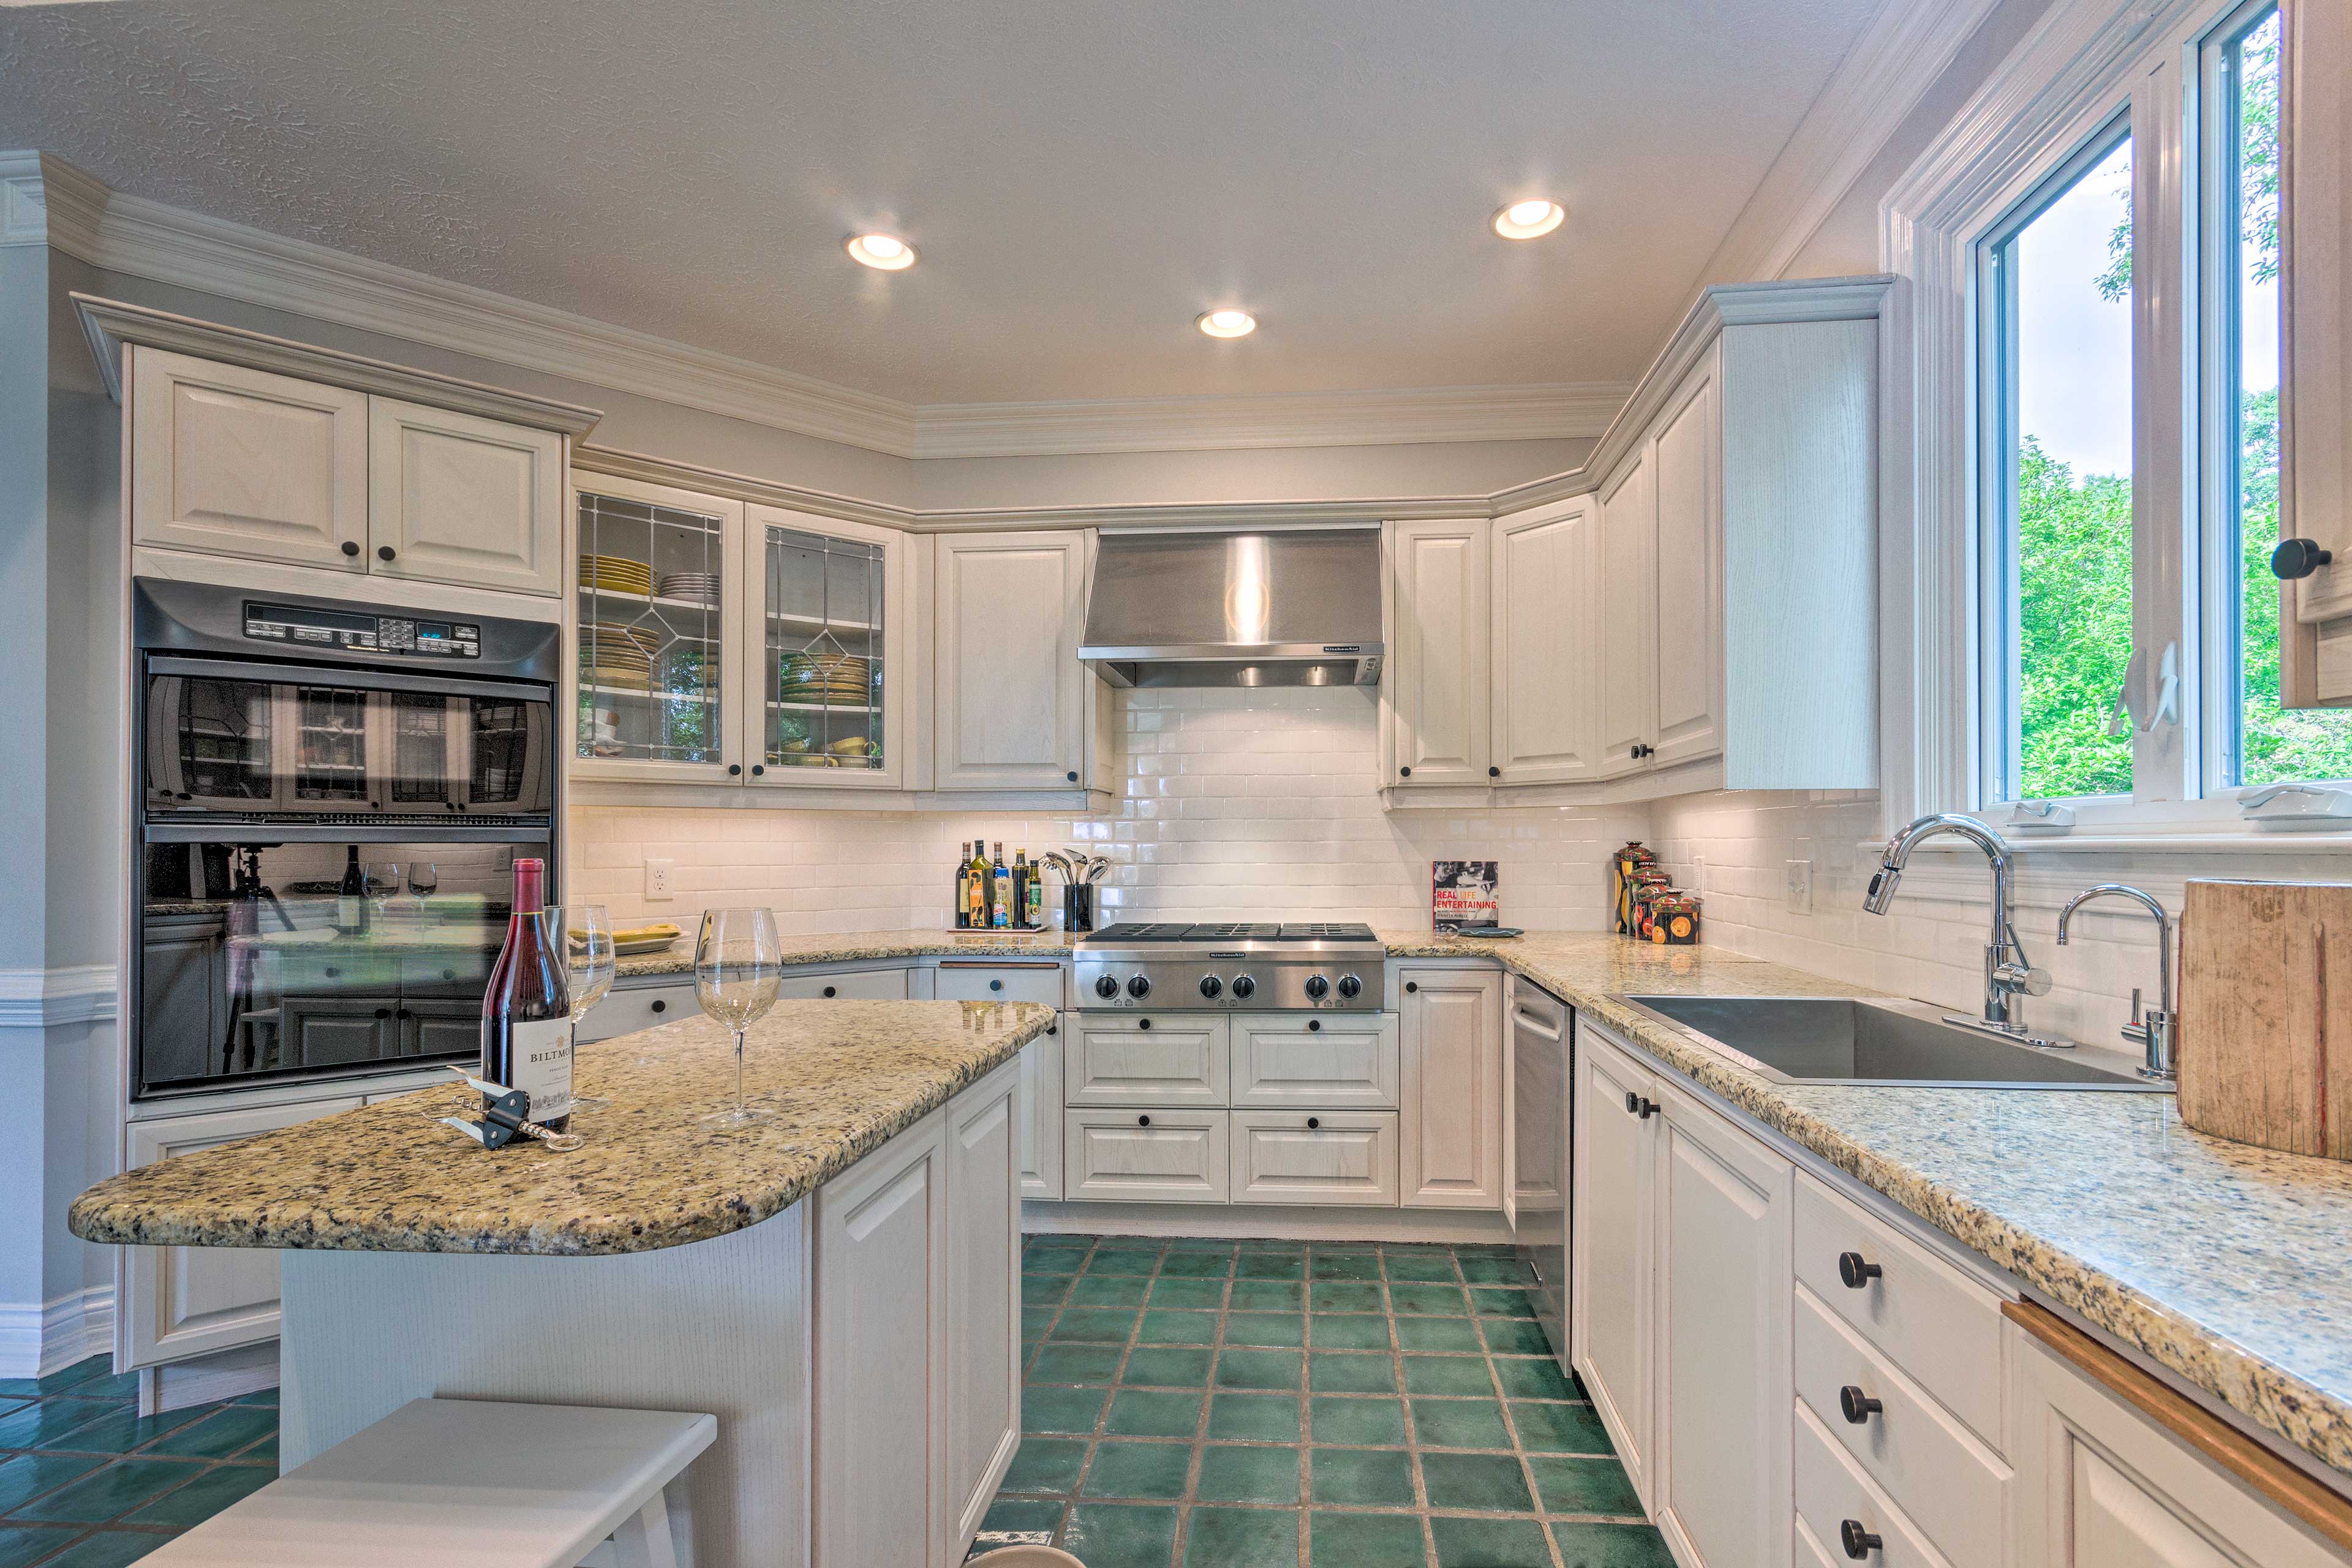 The kitchen comes fully equipped with stainless steel appliances.